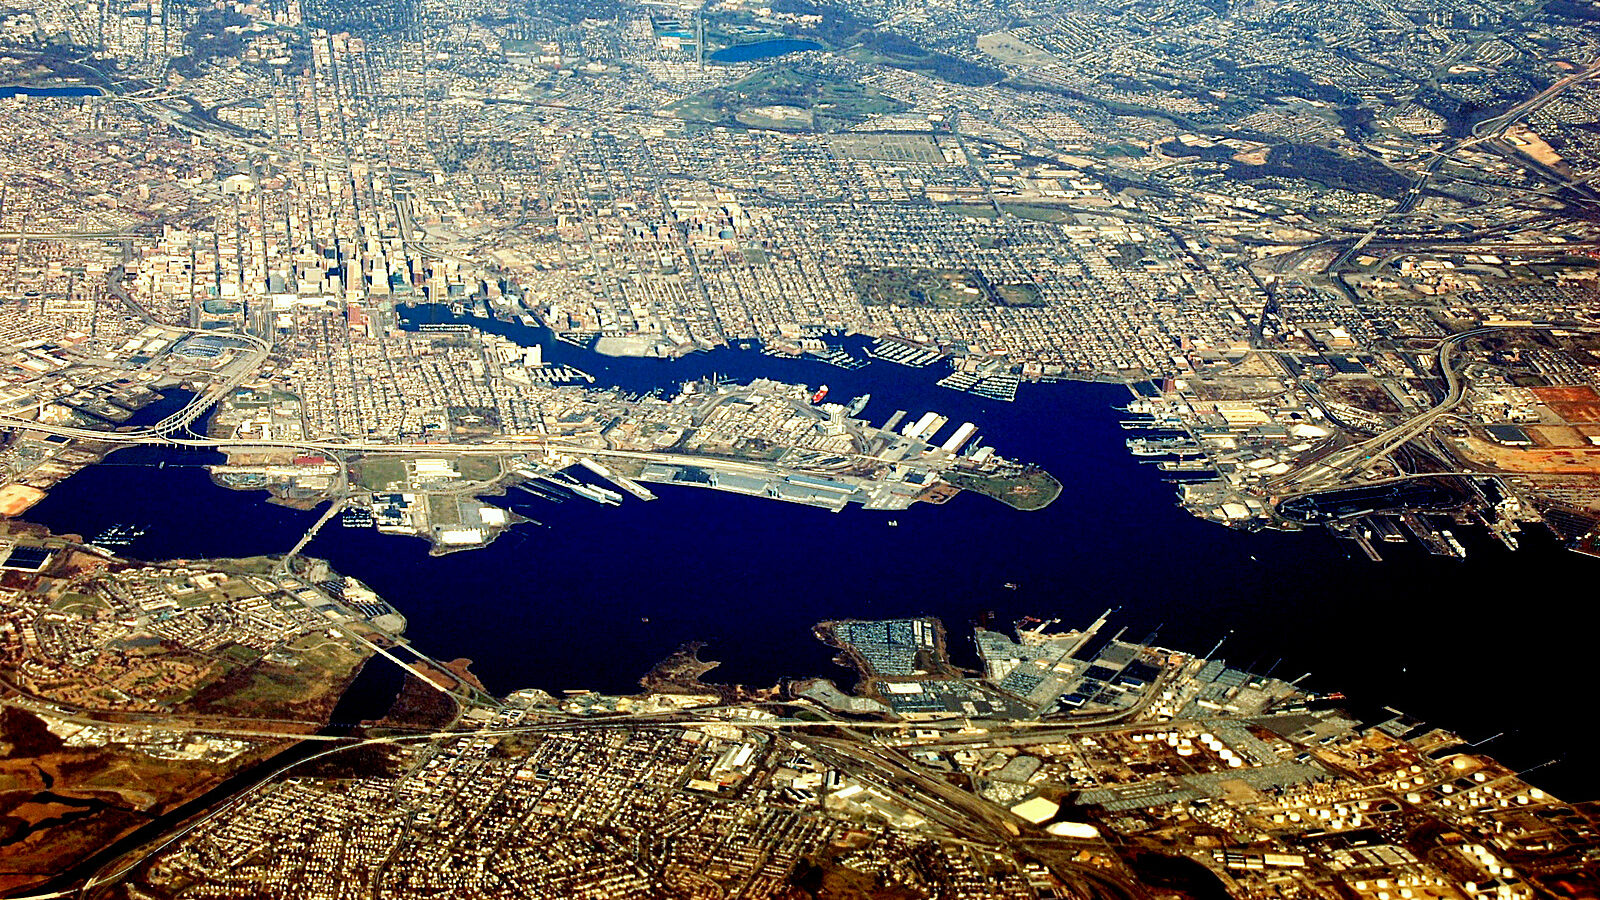 Aerial view of Baltimore from Persistent Surveillance’s Cessna.